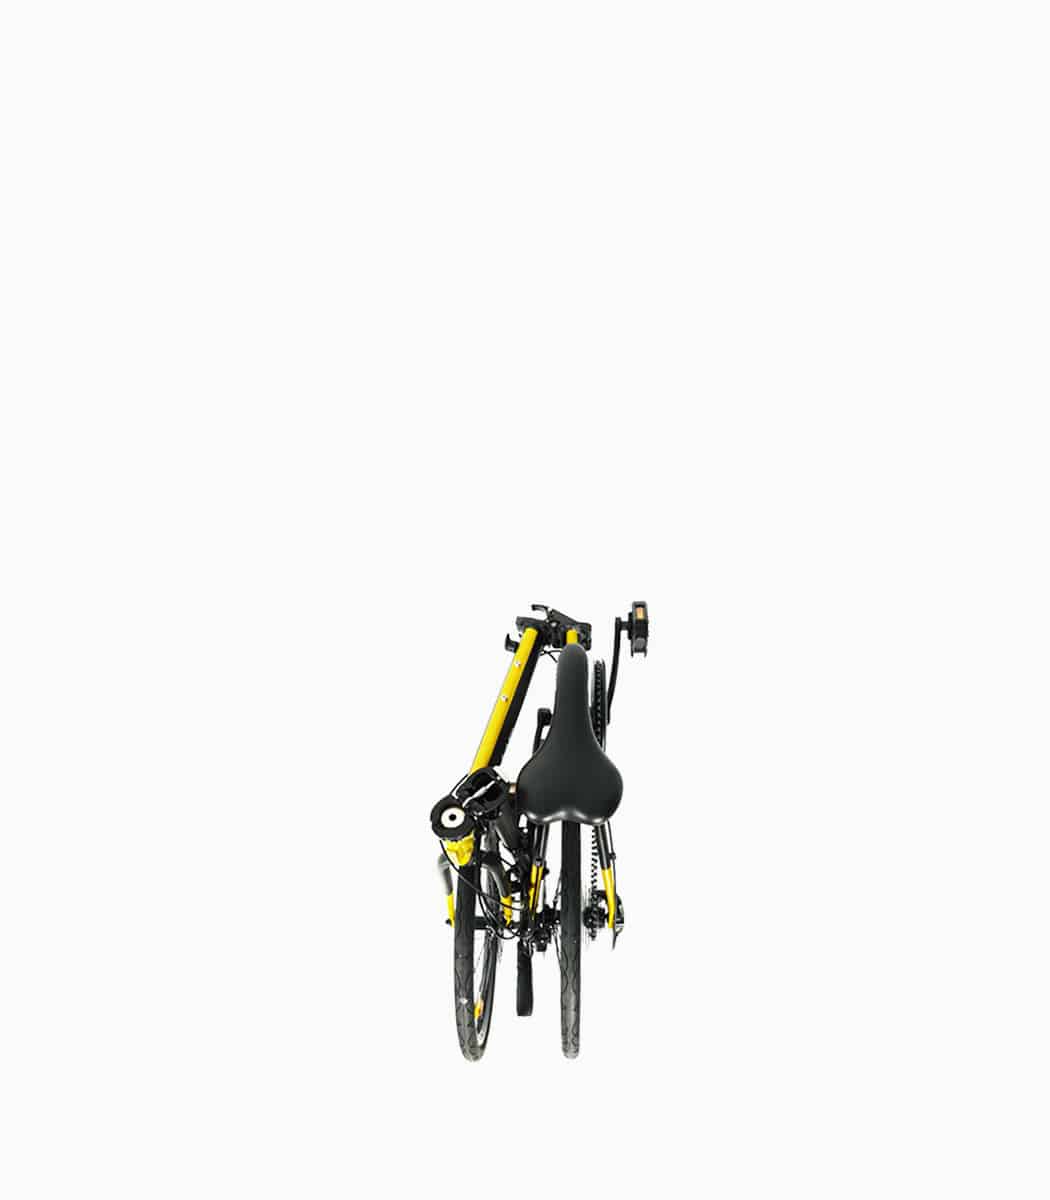 CAMP Polo 8 (BLACK) foldable bicycle folded top